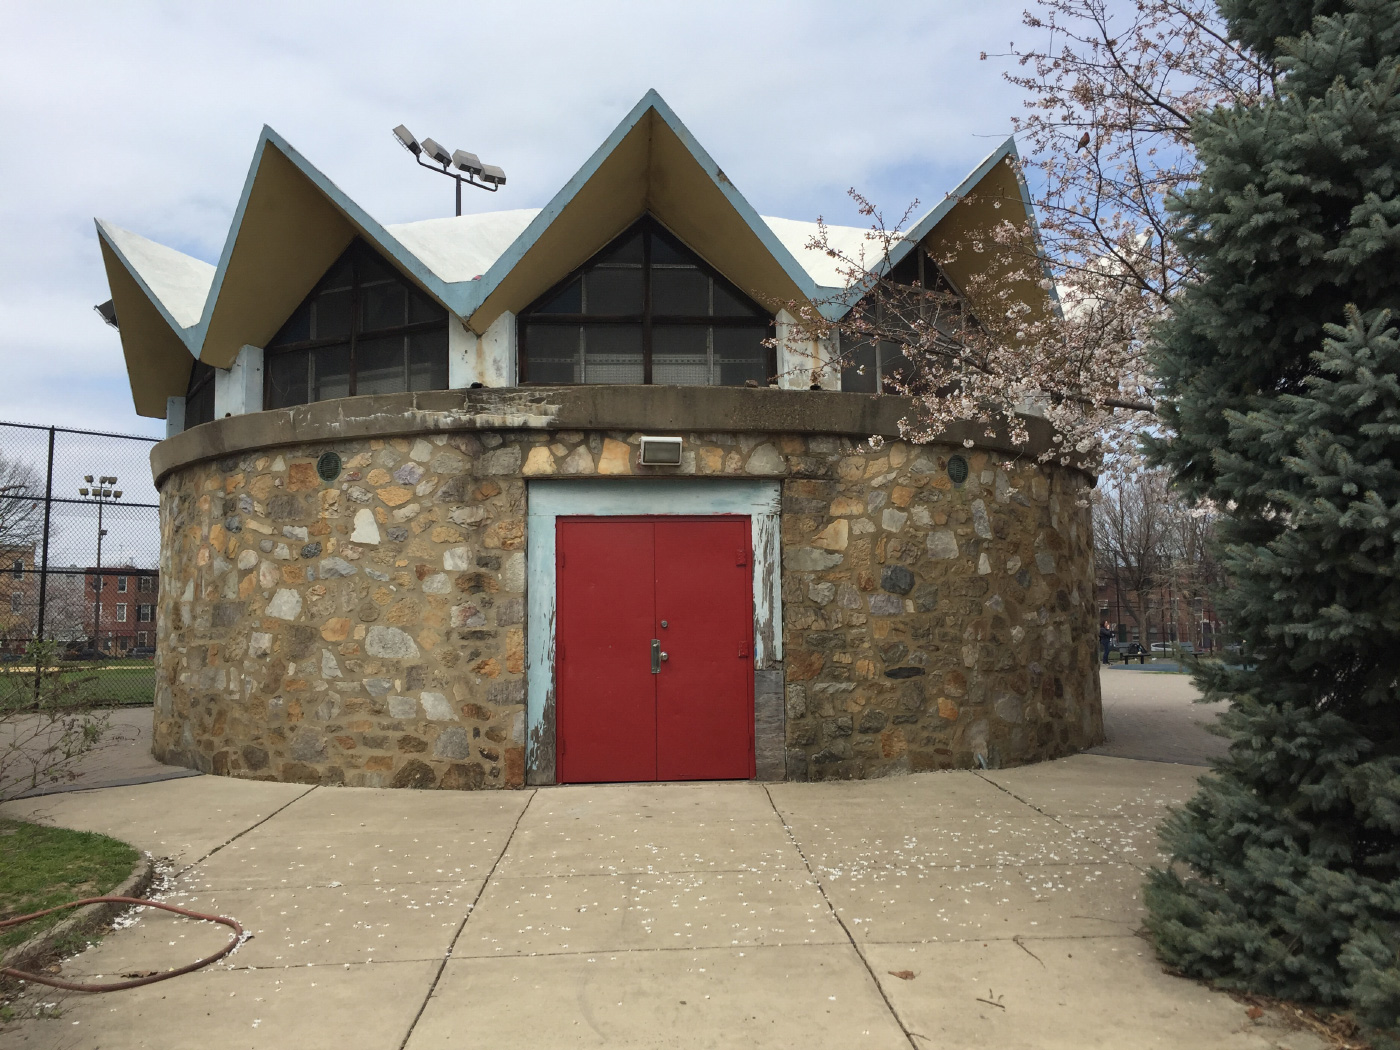 Photo of the Columbus Square pavilion, a small, circular structure with thick stone walls, a single red door, and an angular roof.